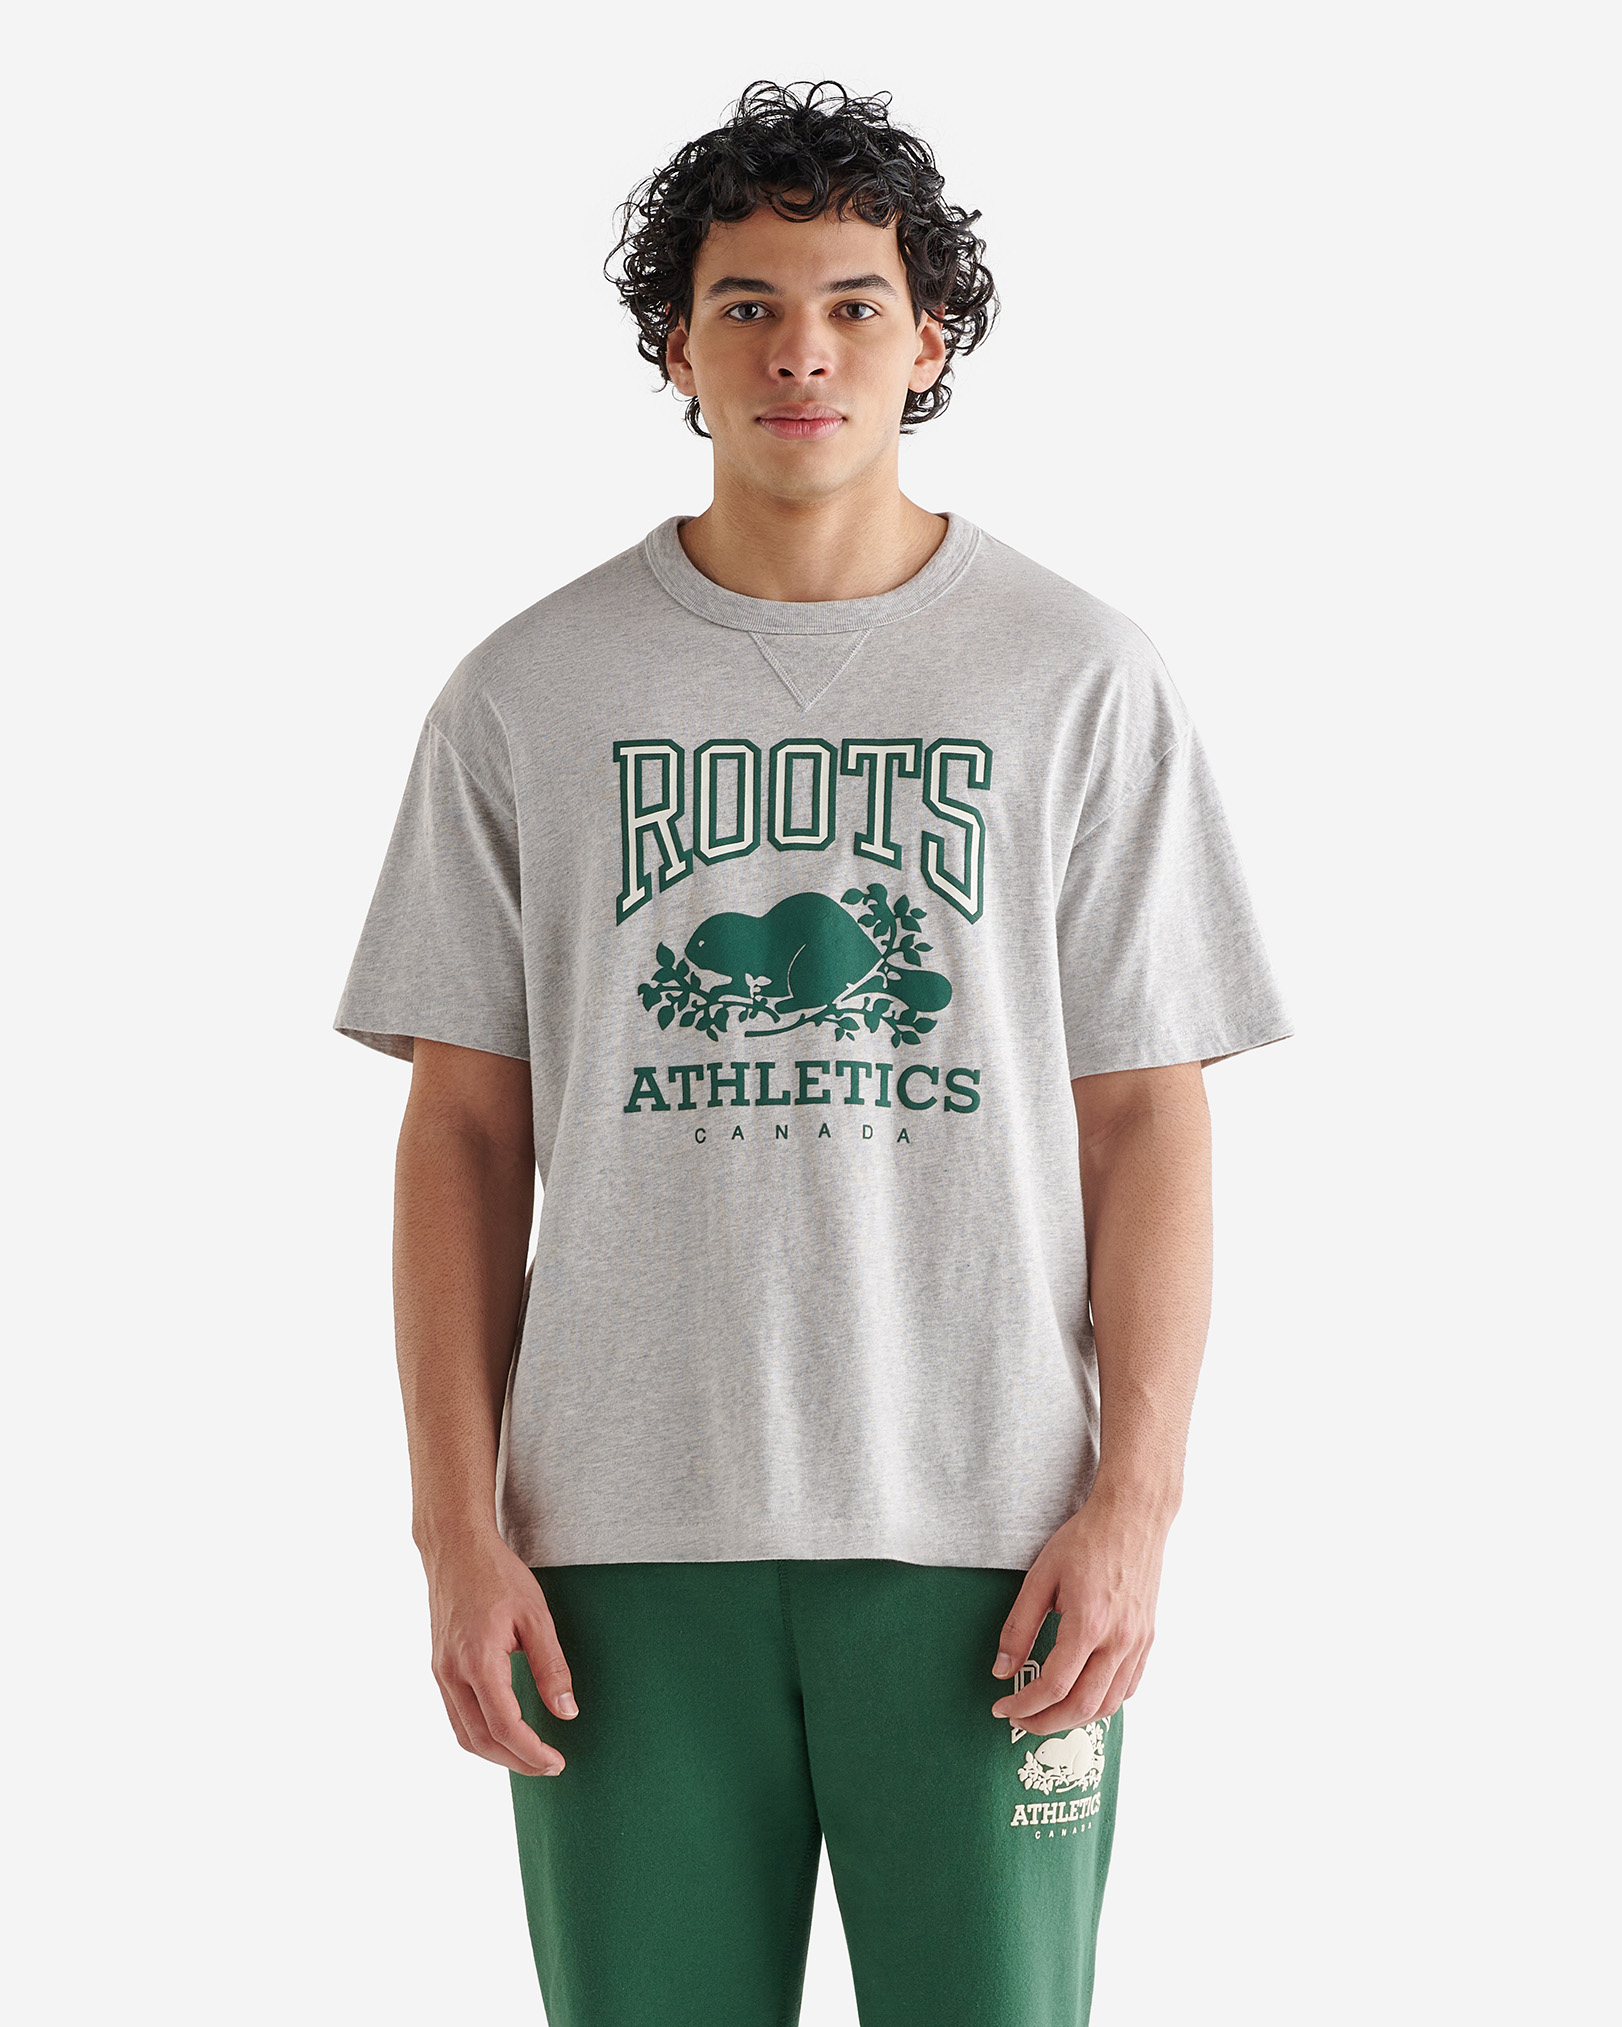 Roots Men's RBA T-Shirt in Athletic Grey Mix